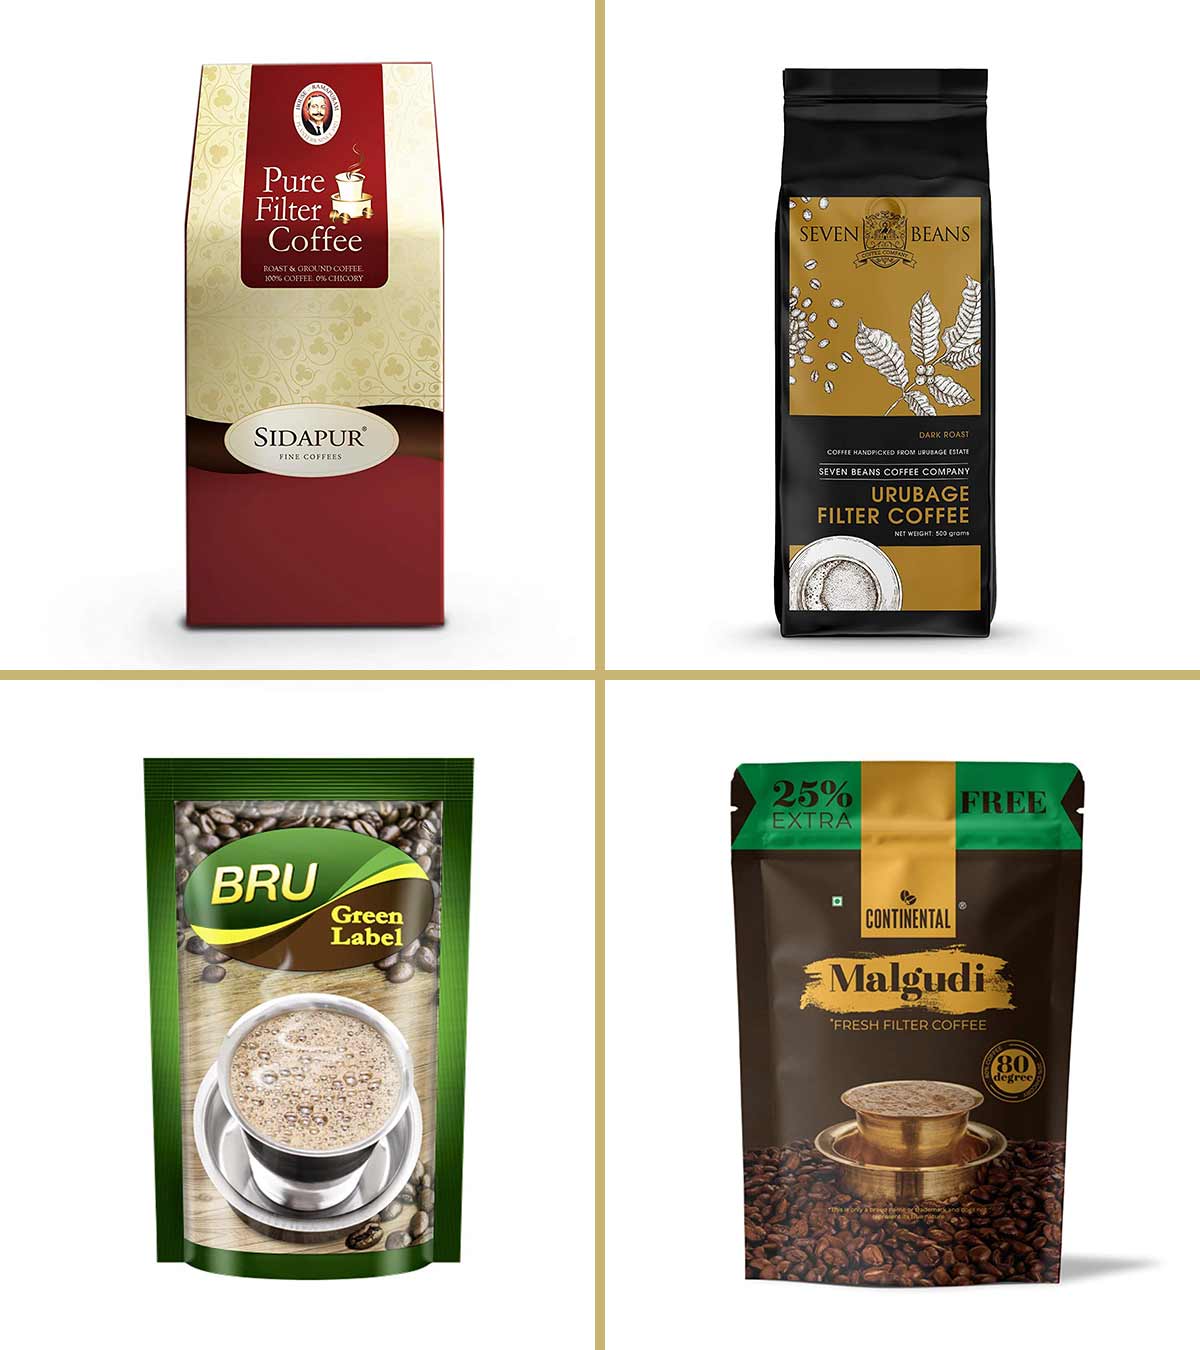 South Indian Filter Coffee Maker Manufacturer & Seller in Chennai